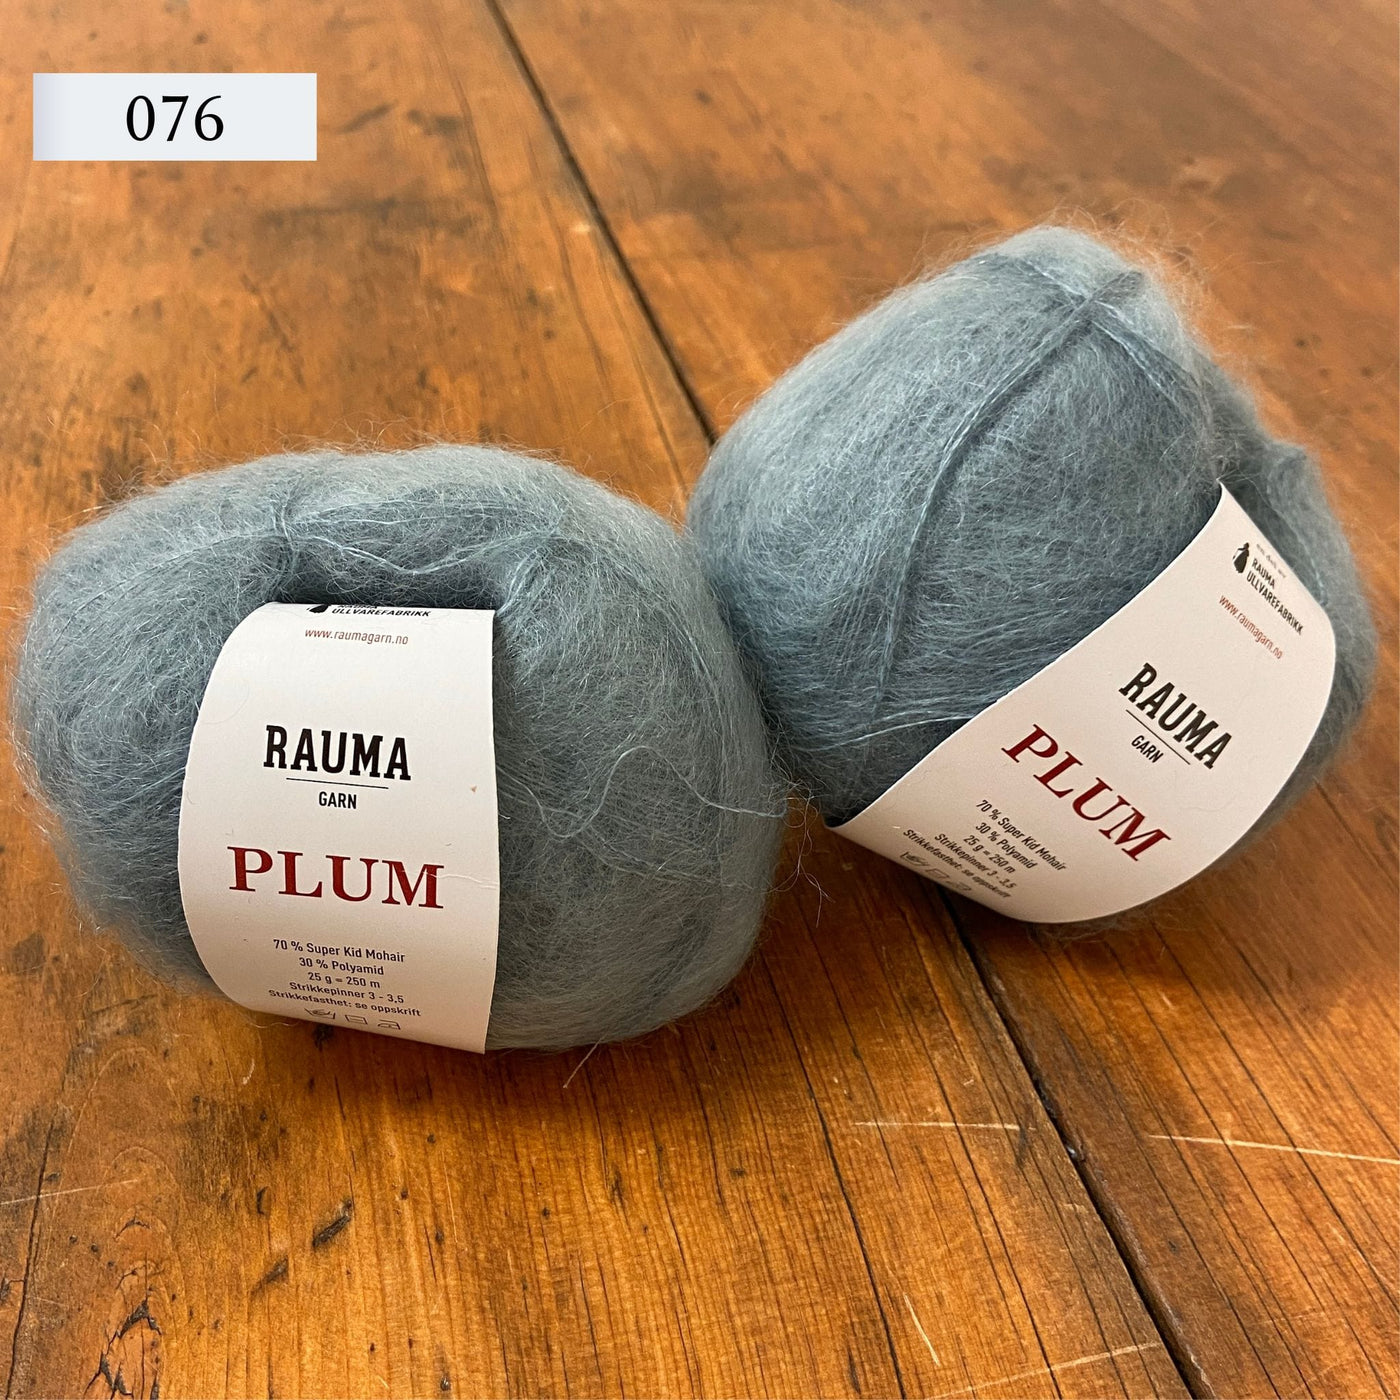 Two balls of Rauma Plum, a laceweight mohair blend yarn, in color 076, light blue.